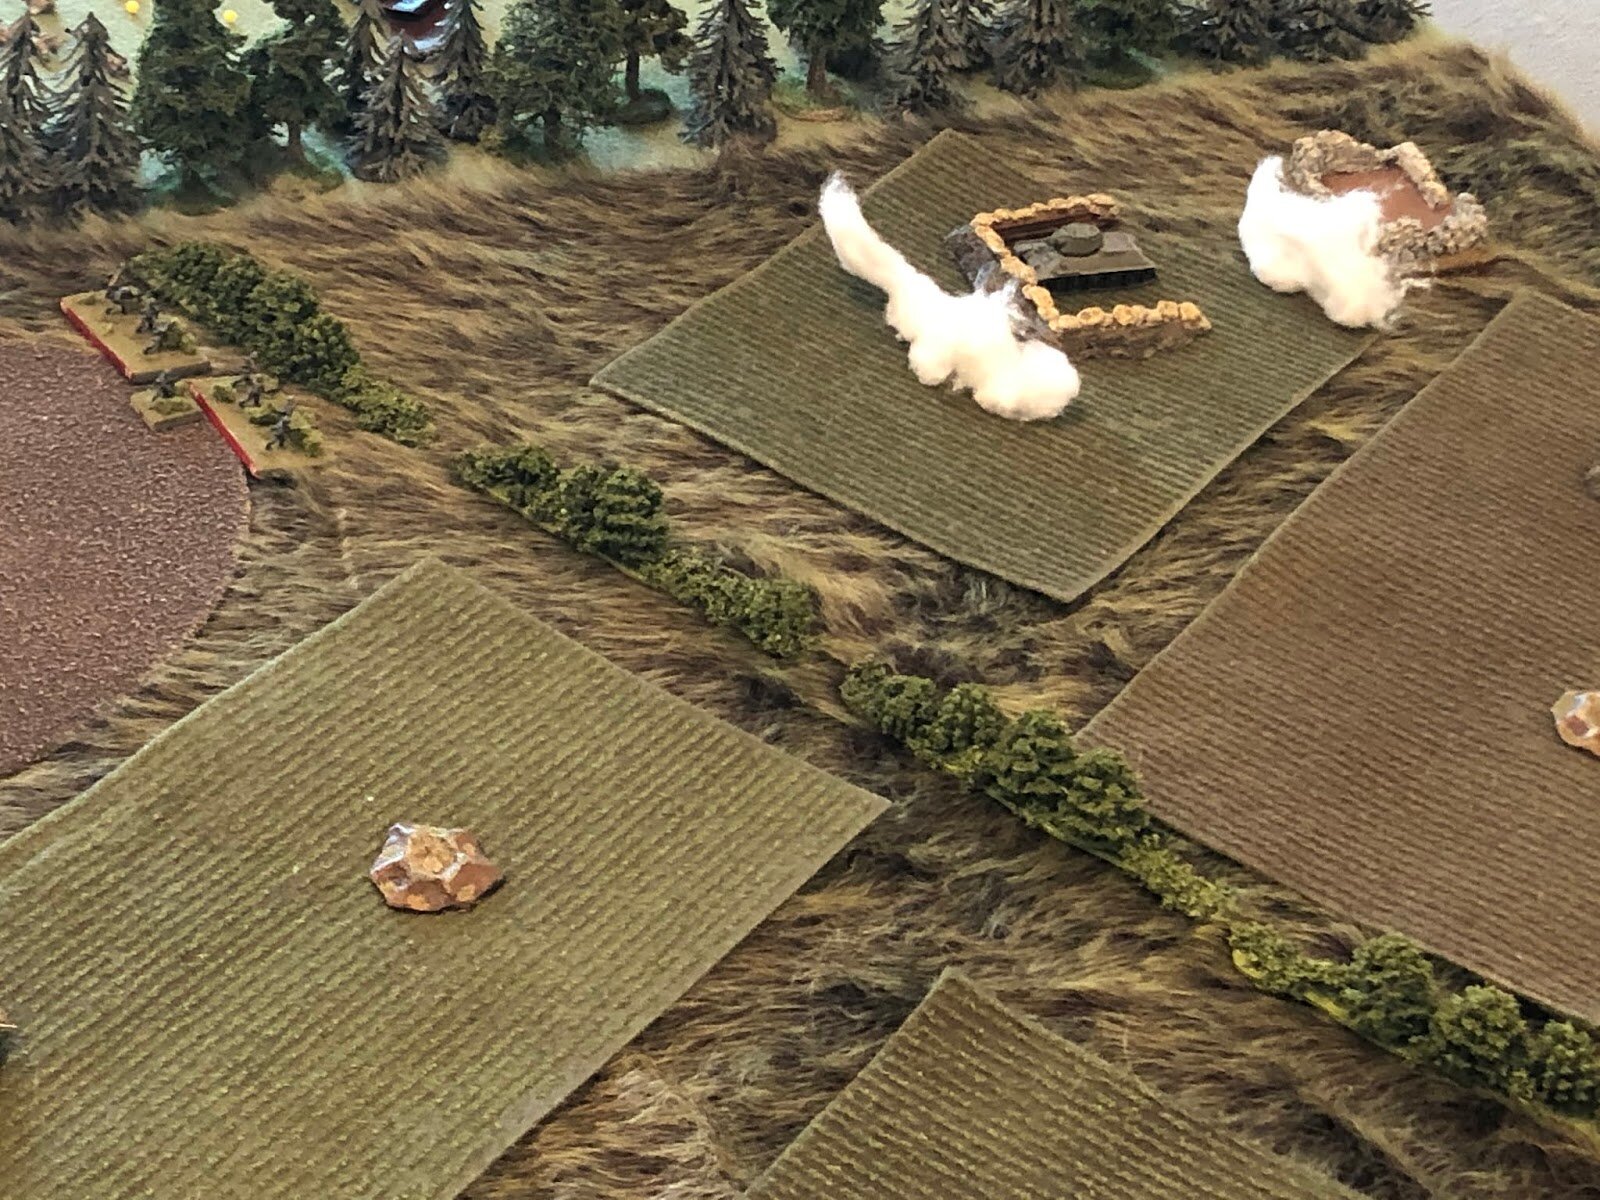  The German mortars fire in support of 2nd Plt, 2nd Co (top left), and this time the smoke is on target, smothering T-34 #2 (top center right). 